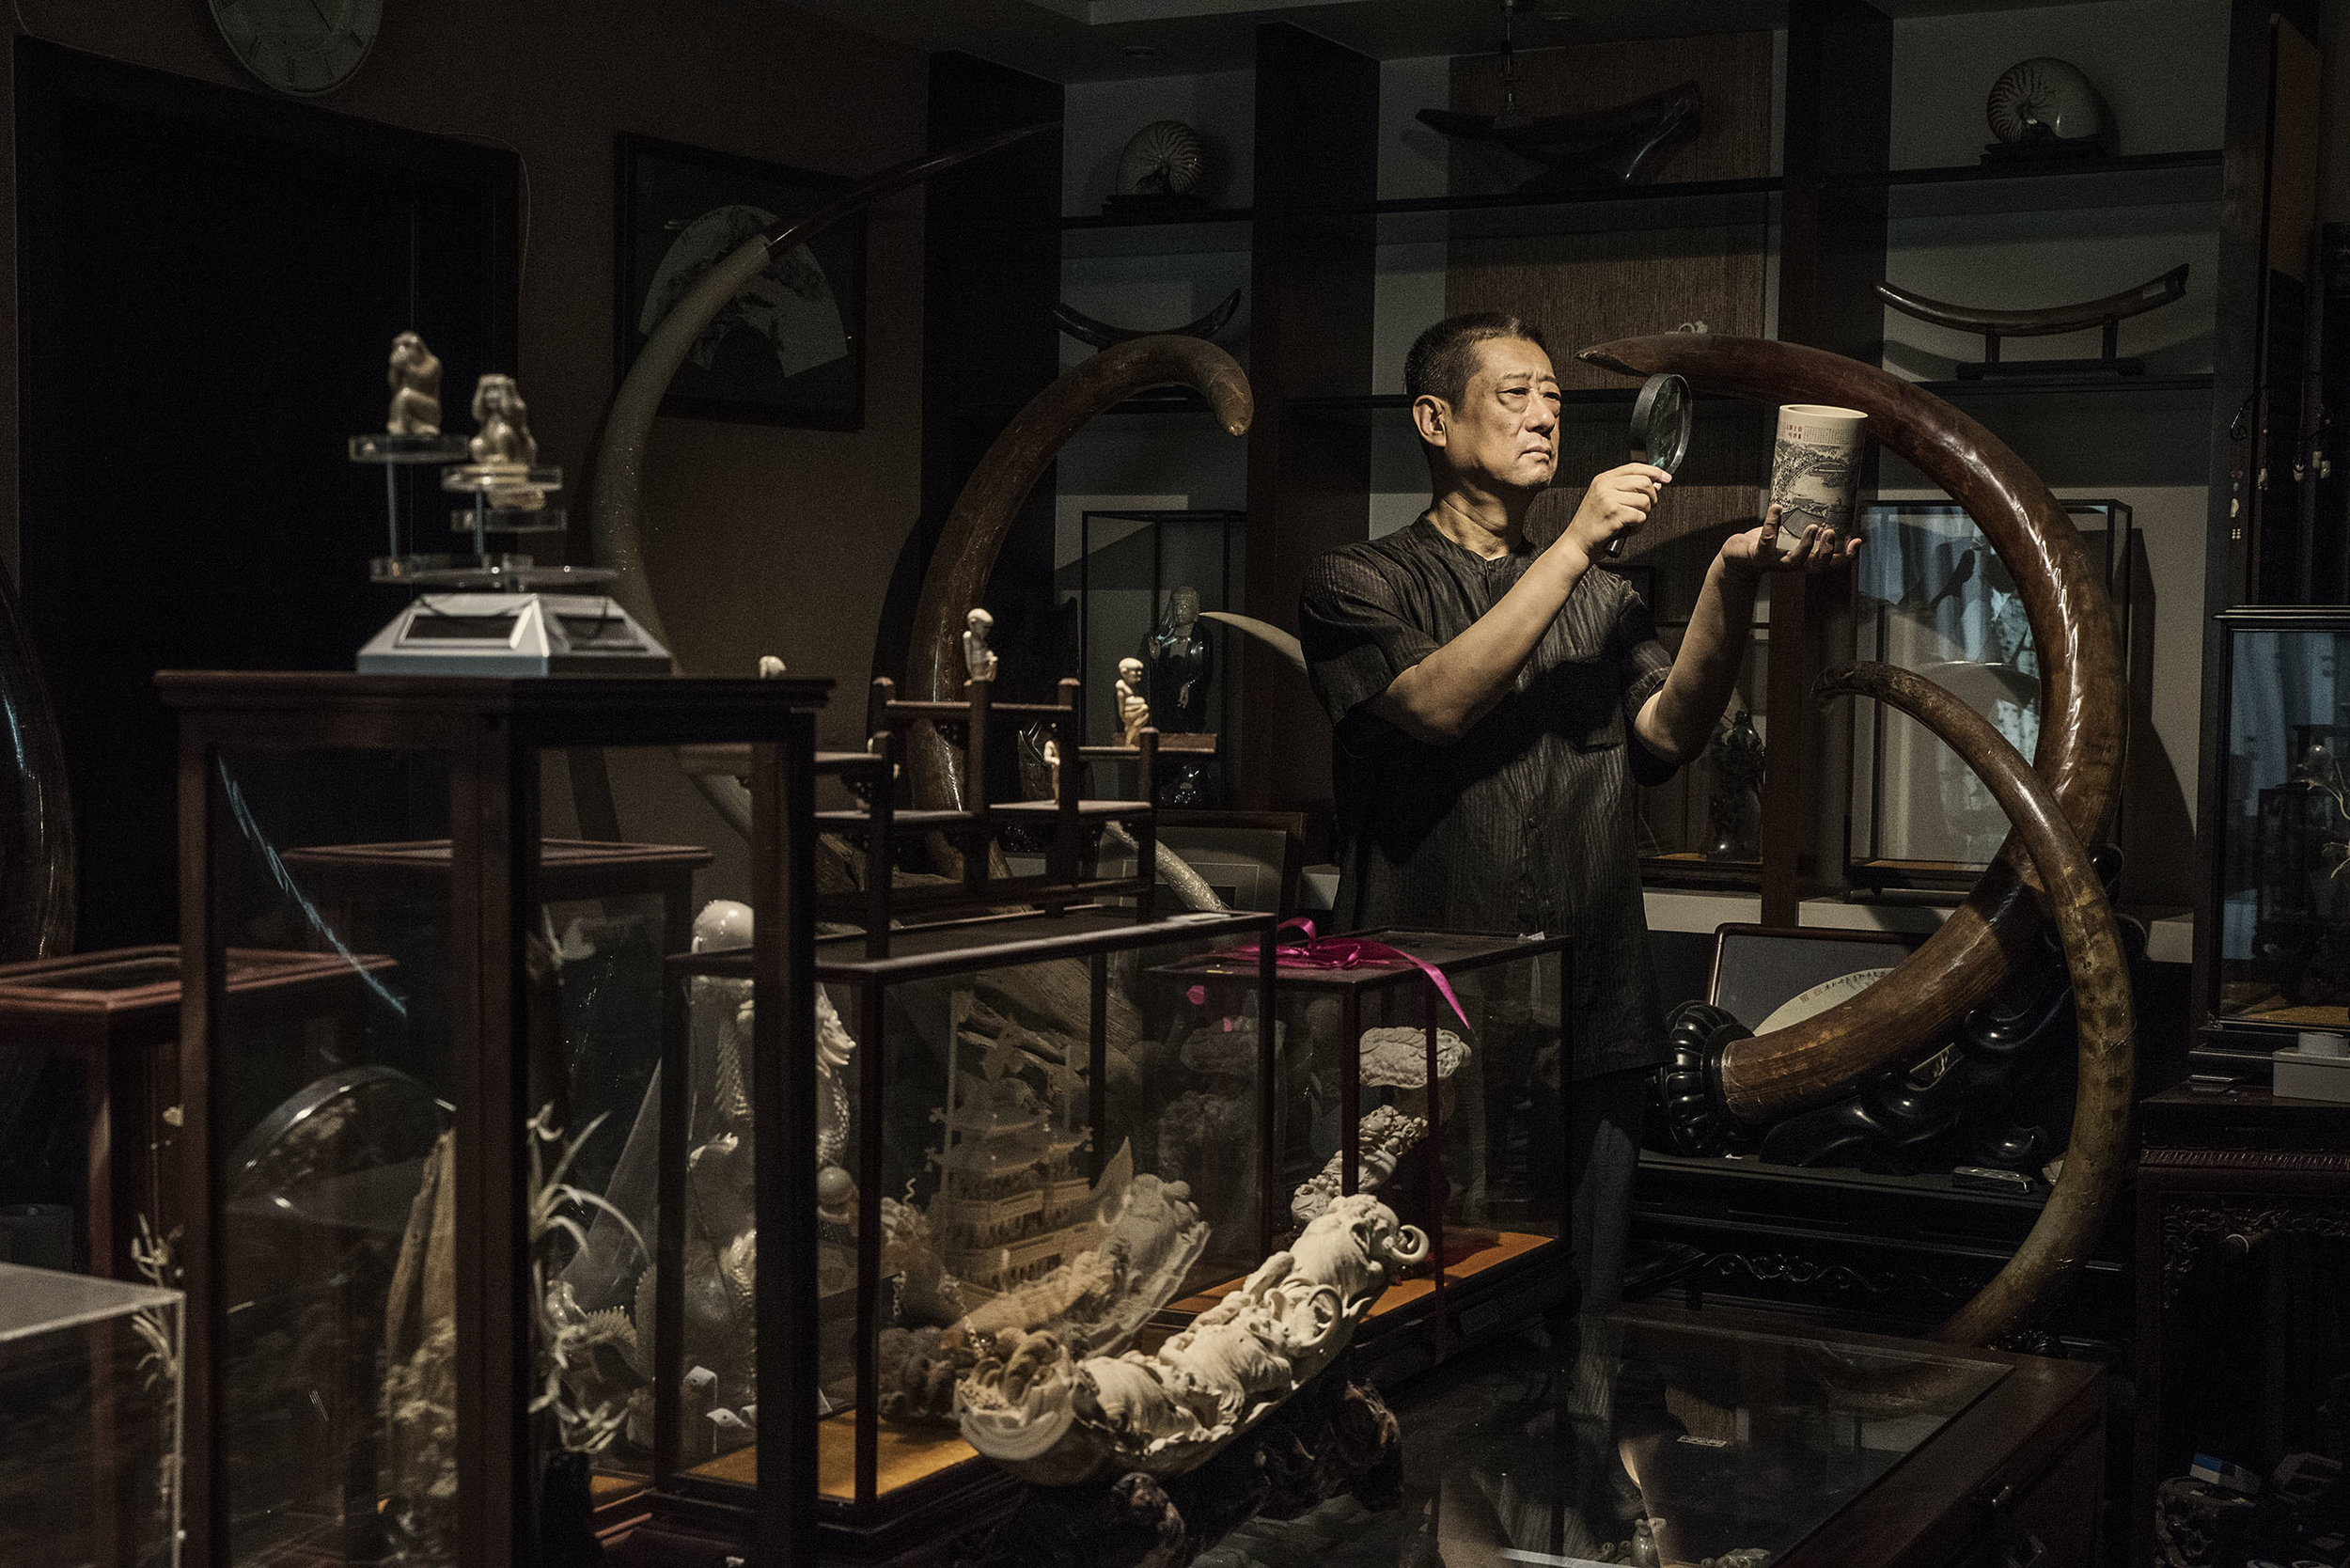  Chen Shu the president of the China Association of Mammoth Ivory Art Research, posing for a portrait at his apartment filled with Mammoth ivory carved objects and tusks.  